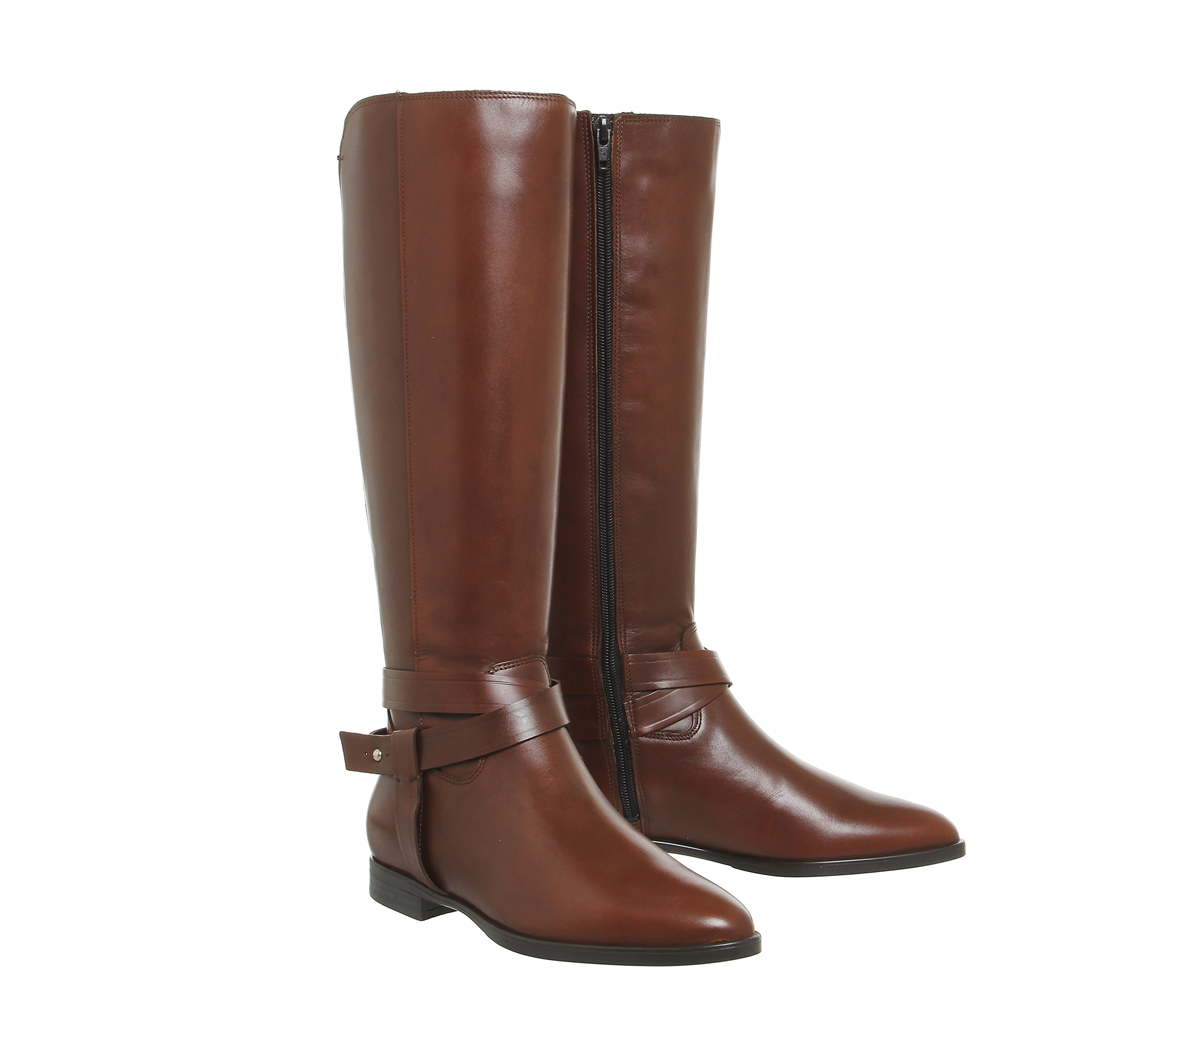 Office Kingdom Riding Boots Cognac Leather - Knee High Boots